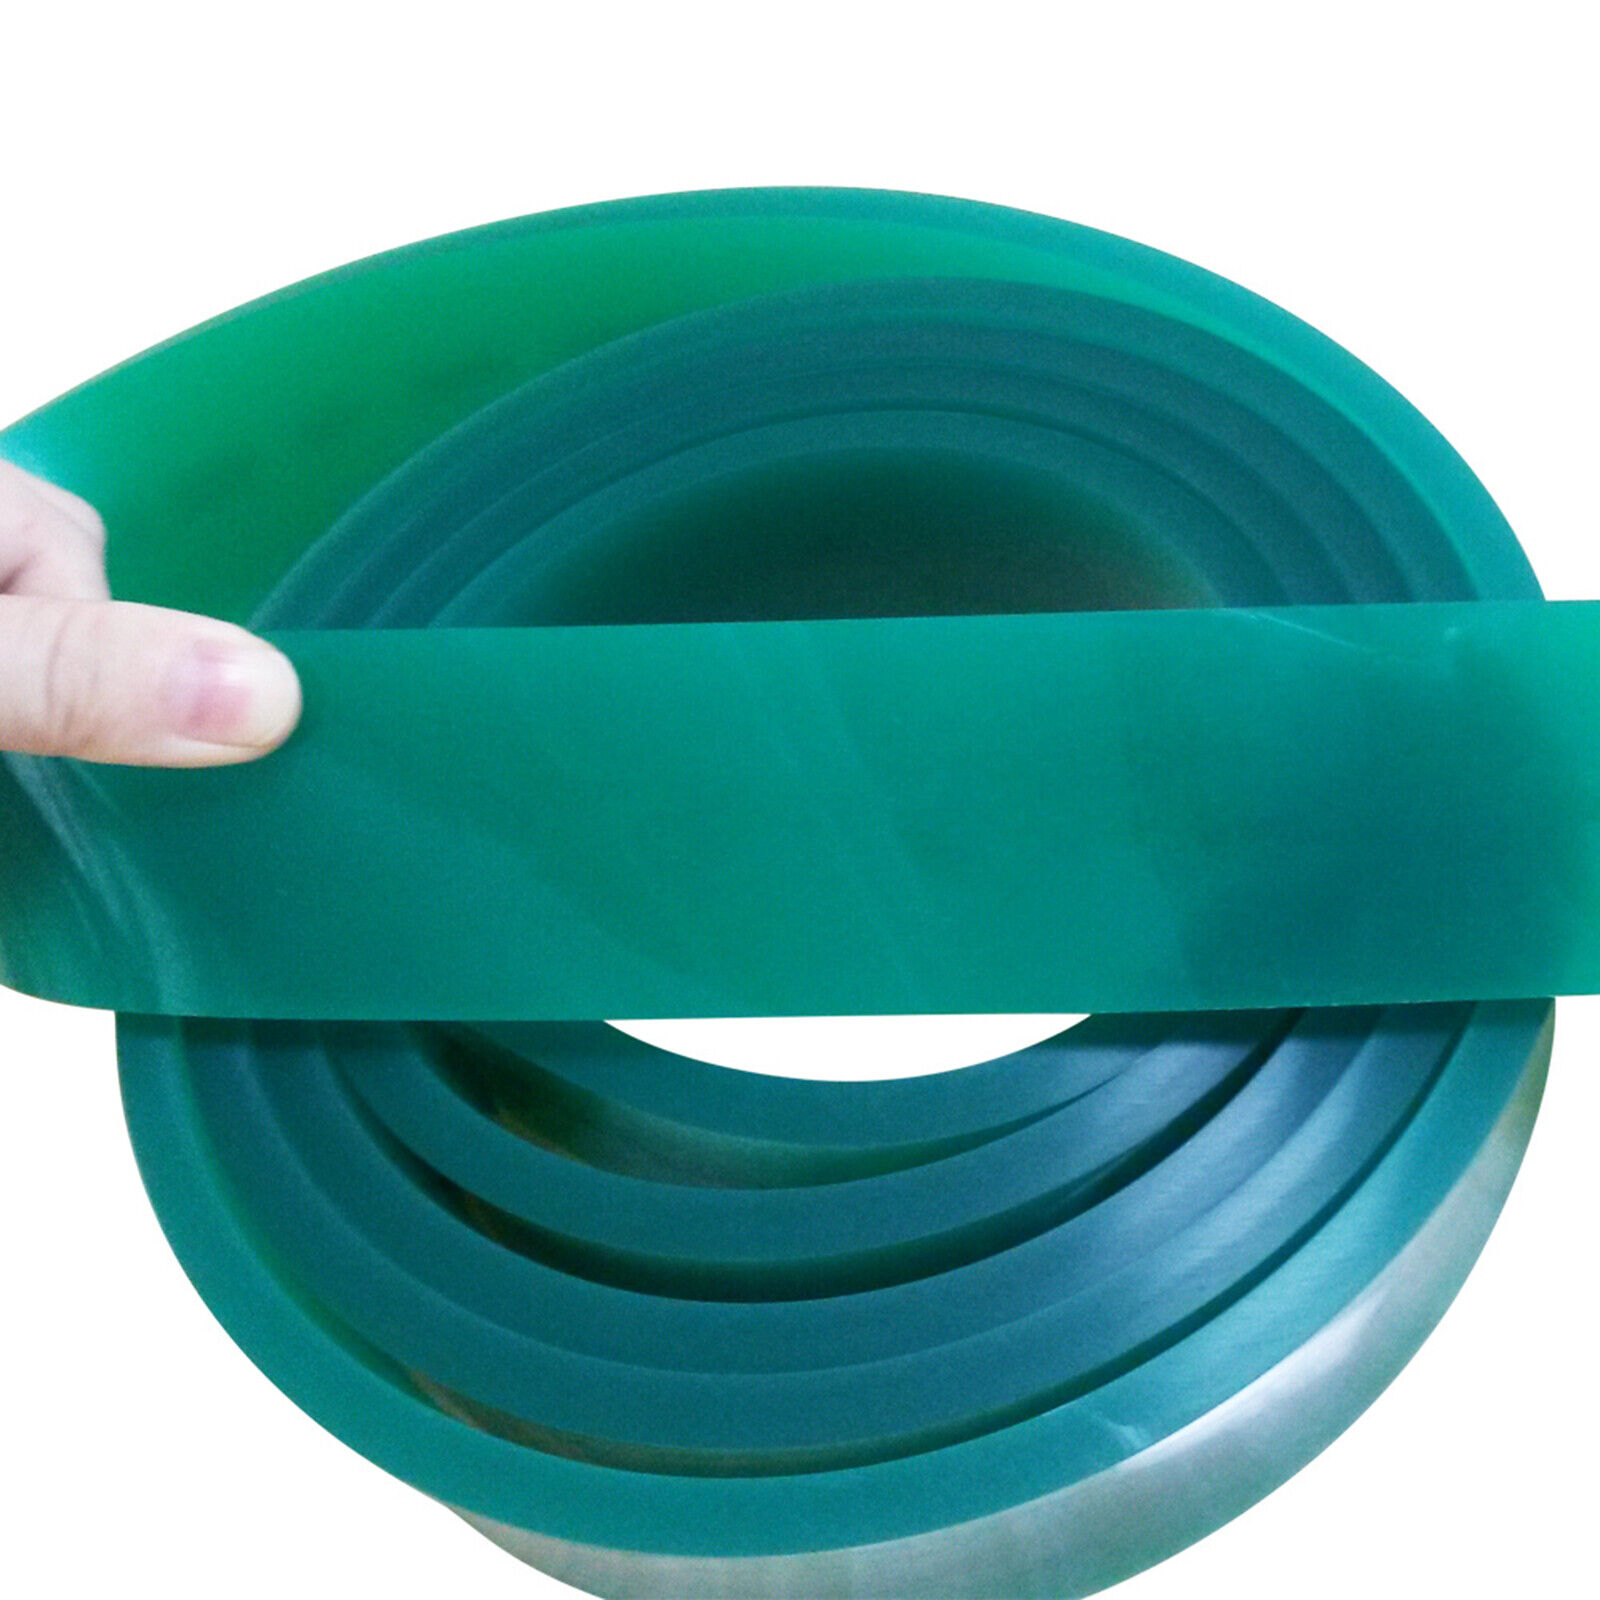 80 DURO 6FT 72" Silk Screen Printing Squeegee Blade Polyurethane Rubber Green Unbranded Does Not Apply - фотография #3